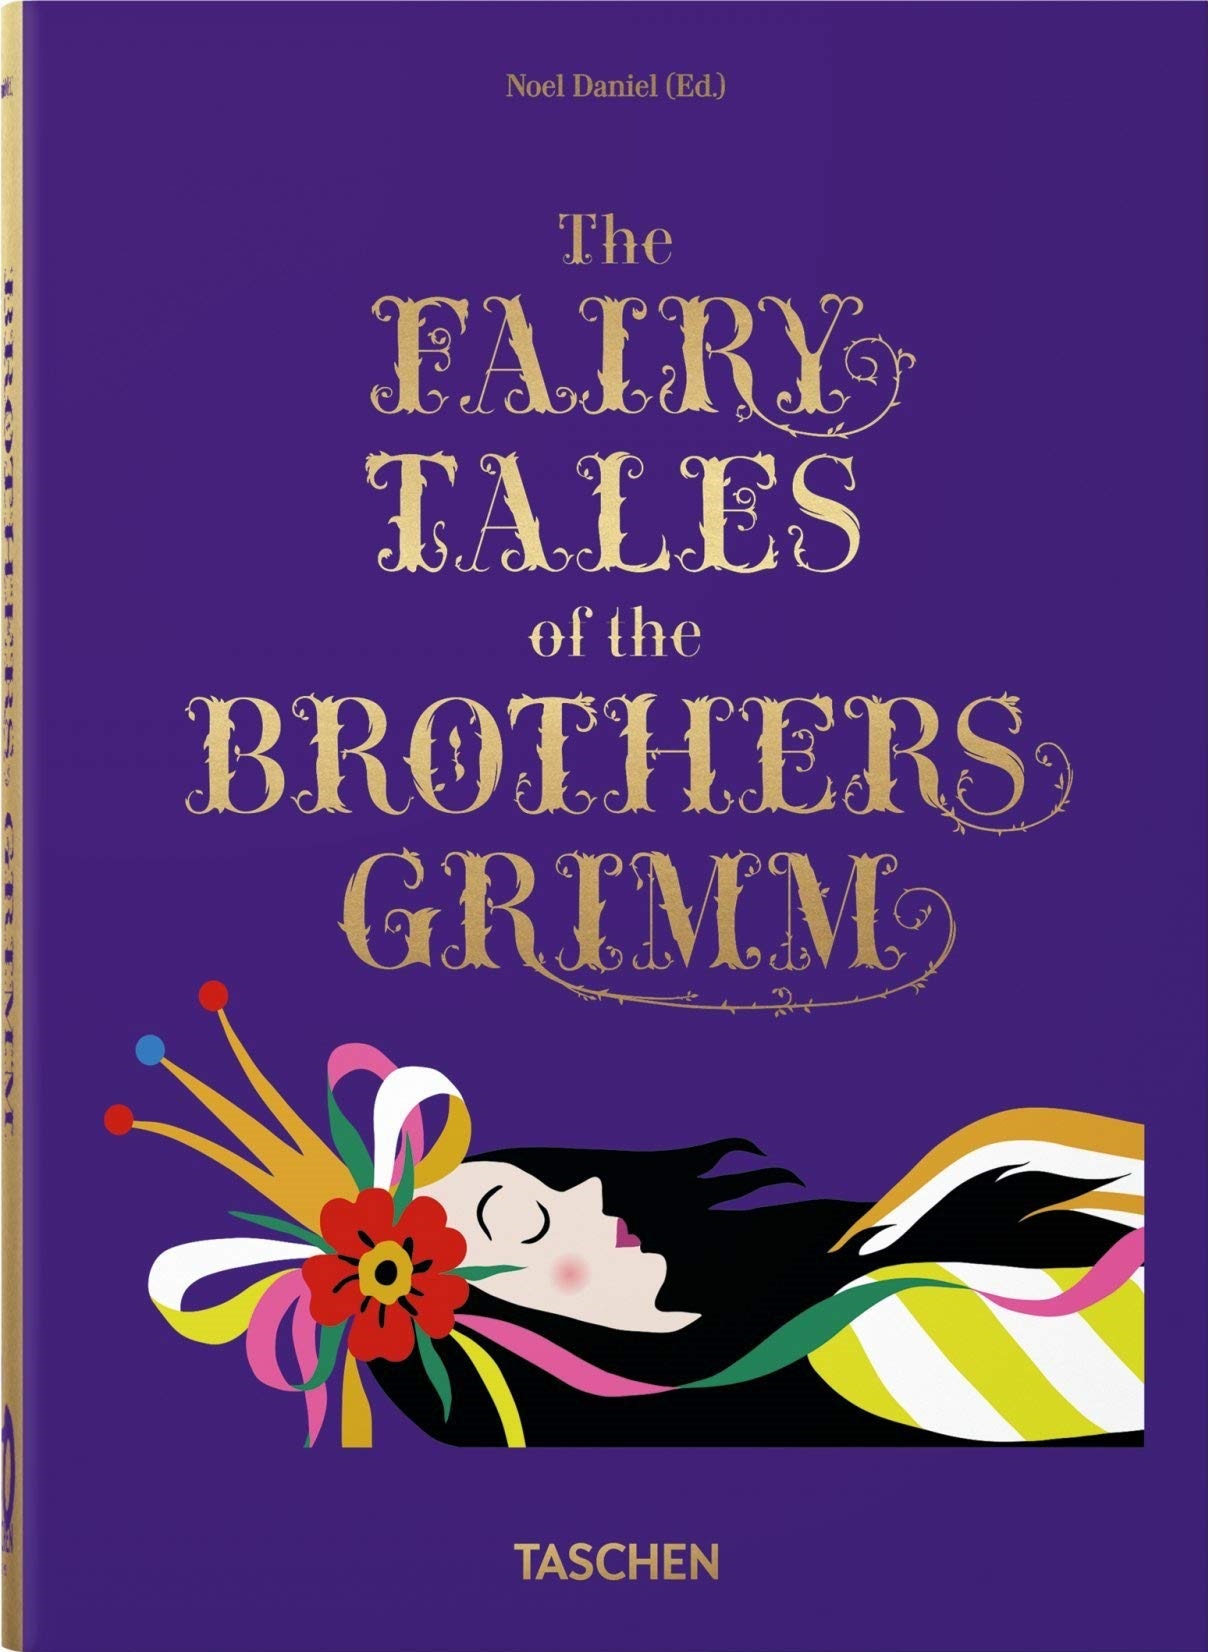 The Fairy Tales of the Brothers Grimm. The Fairy Tales of Hans Christian Andersen | Brothers Grimm, Hans Christian Andersen, Noel Daniel